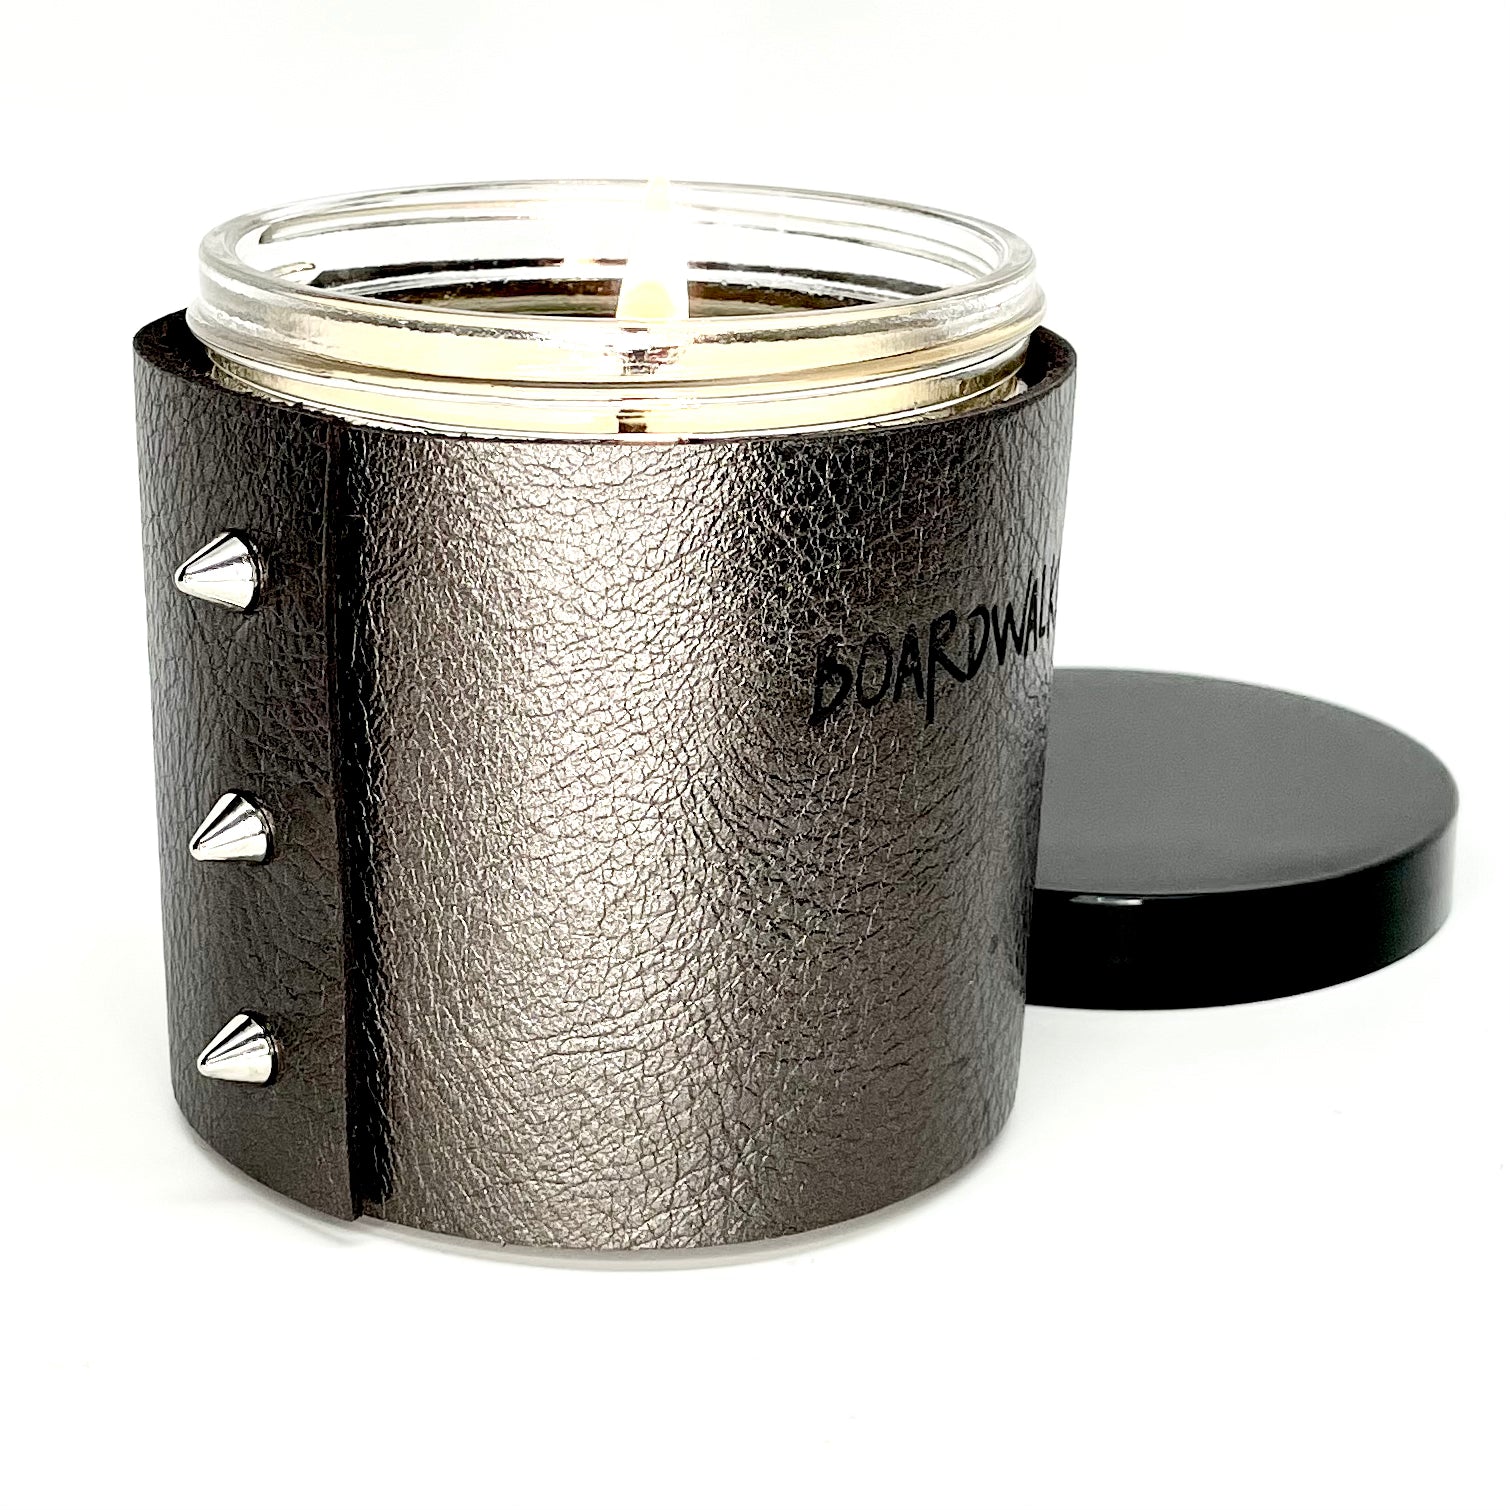 Luxury all natural soy candle in a metallic leather in gunmetal grey with 3 shiny silver cone shaped studs